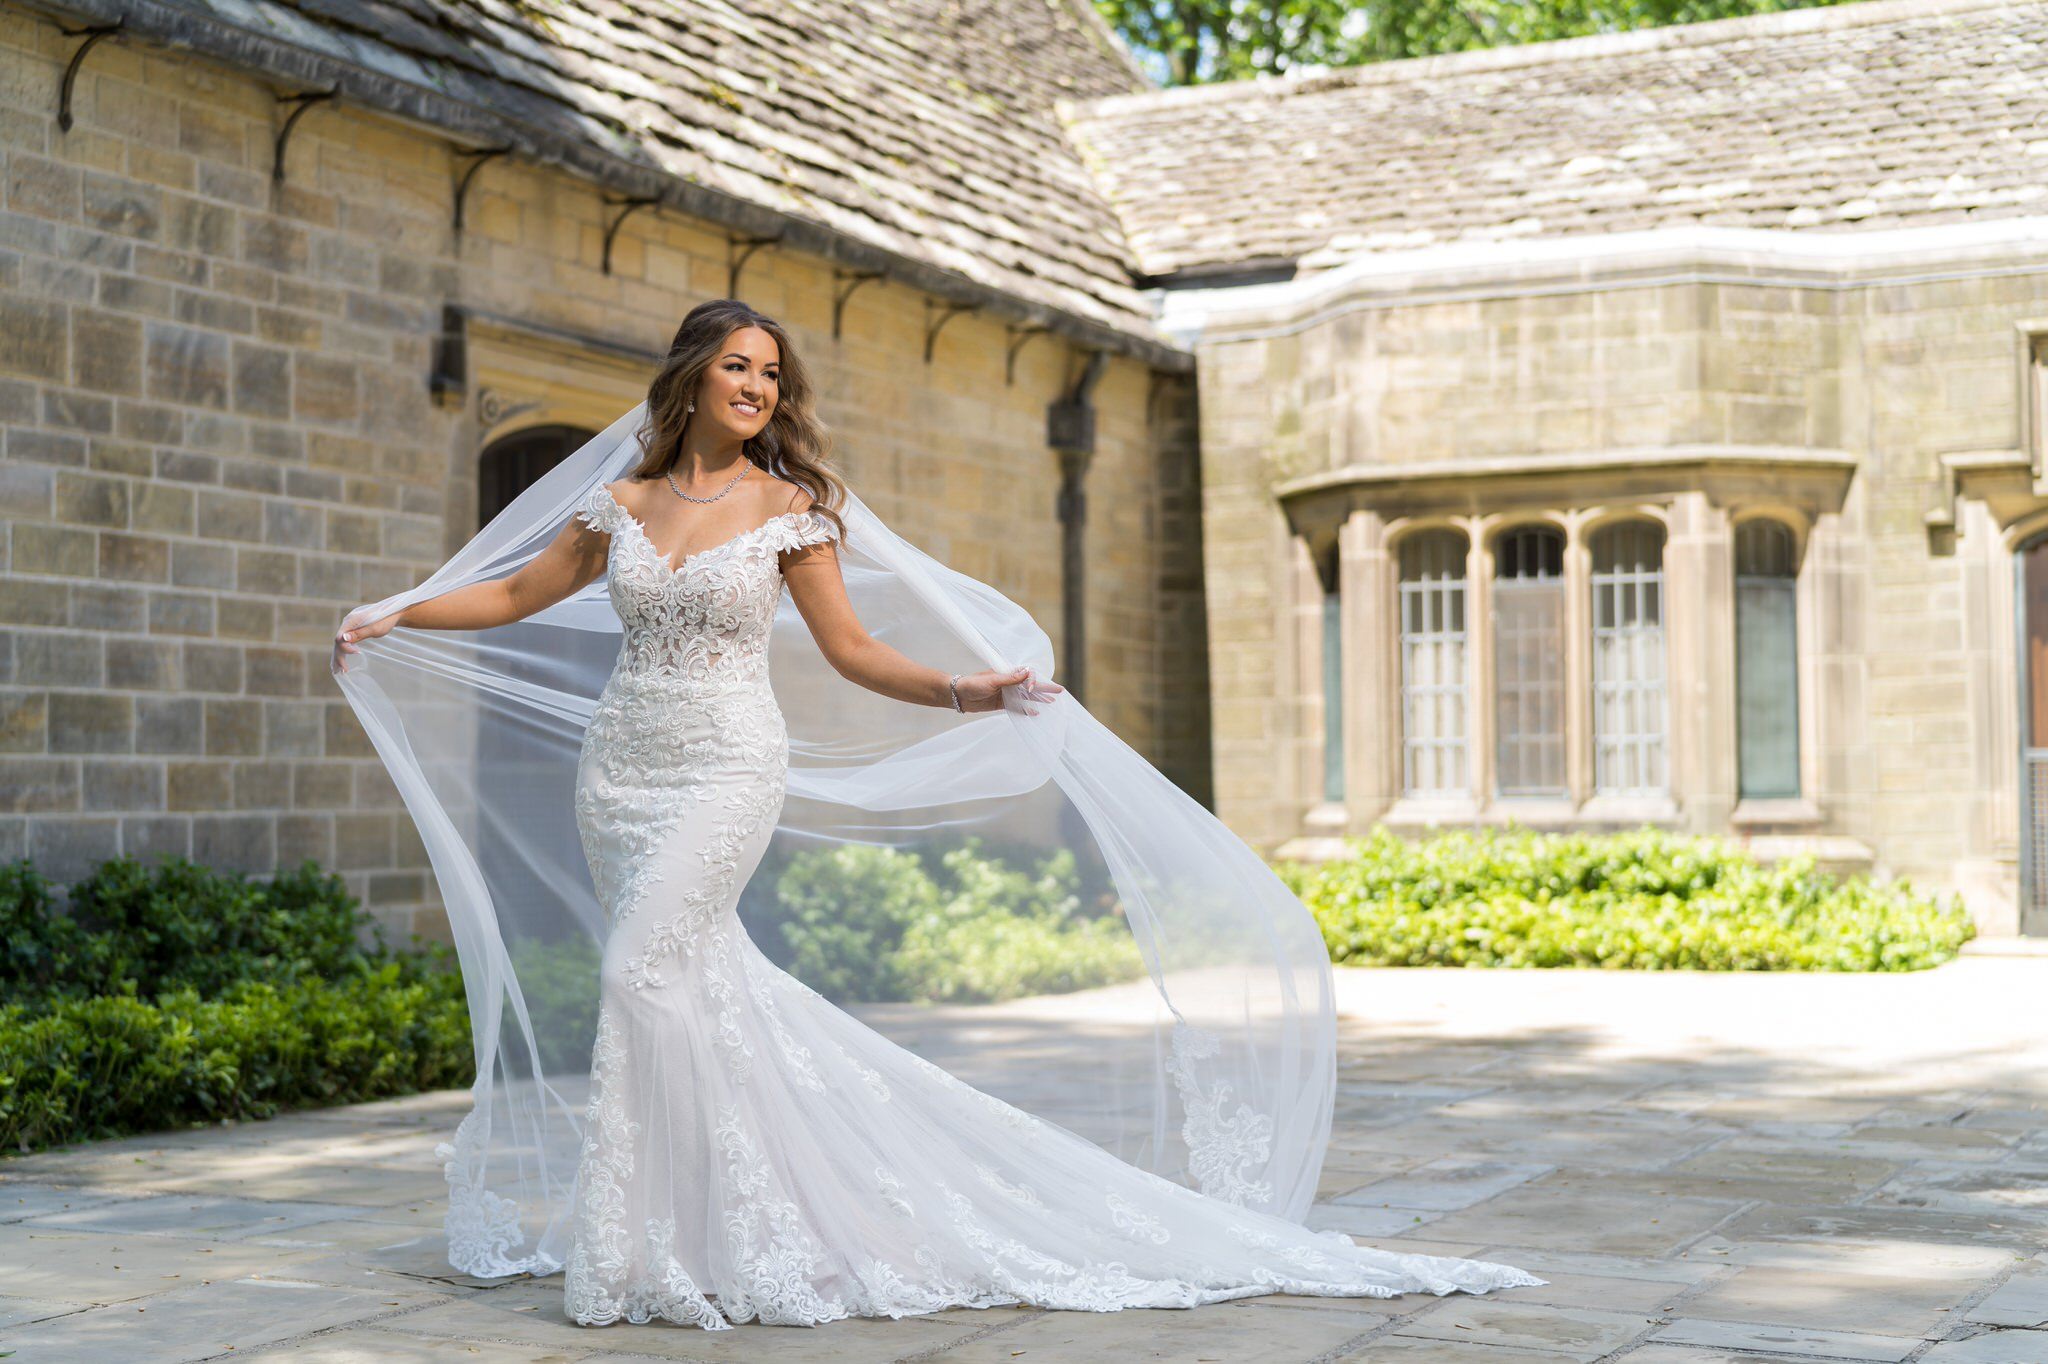 Bride poses while holding her veil at the Edsel Ford house